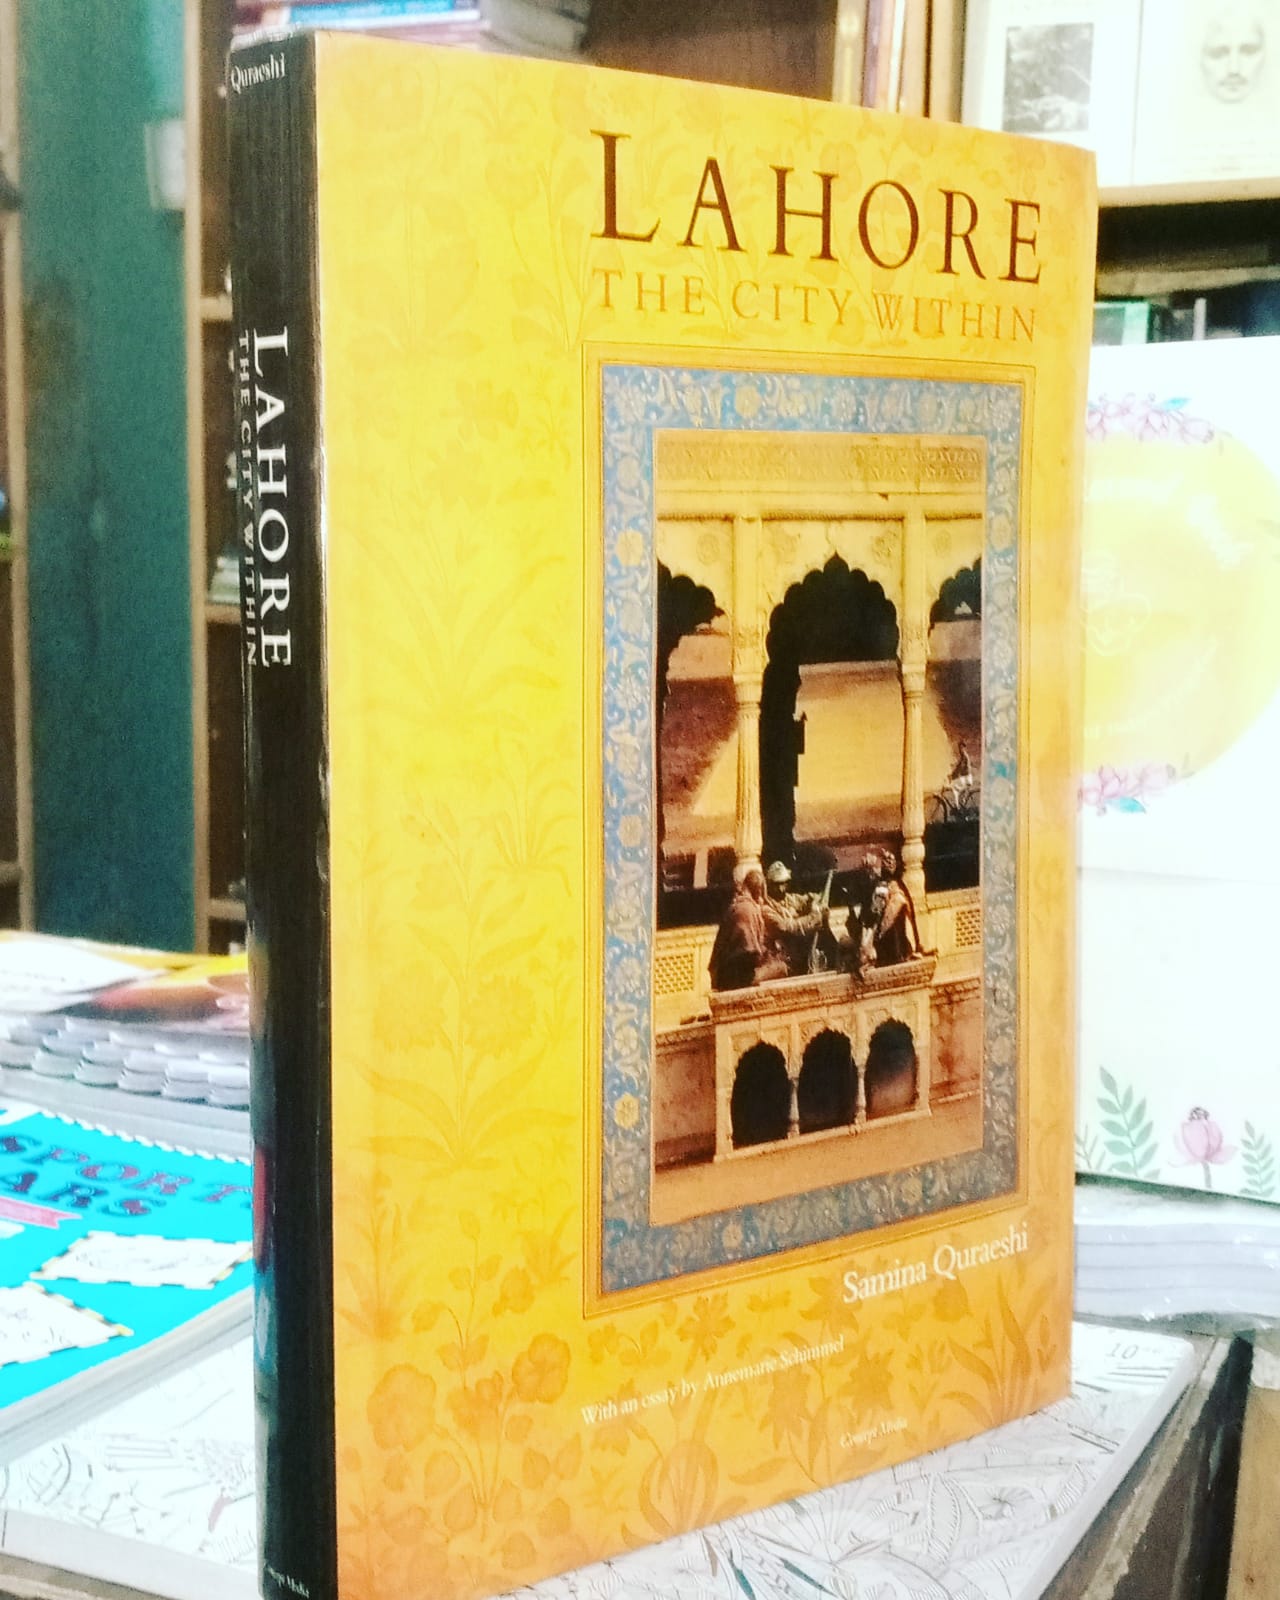 lahore the city within by samina qraeshi with an eassy by annemarie schimmel